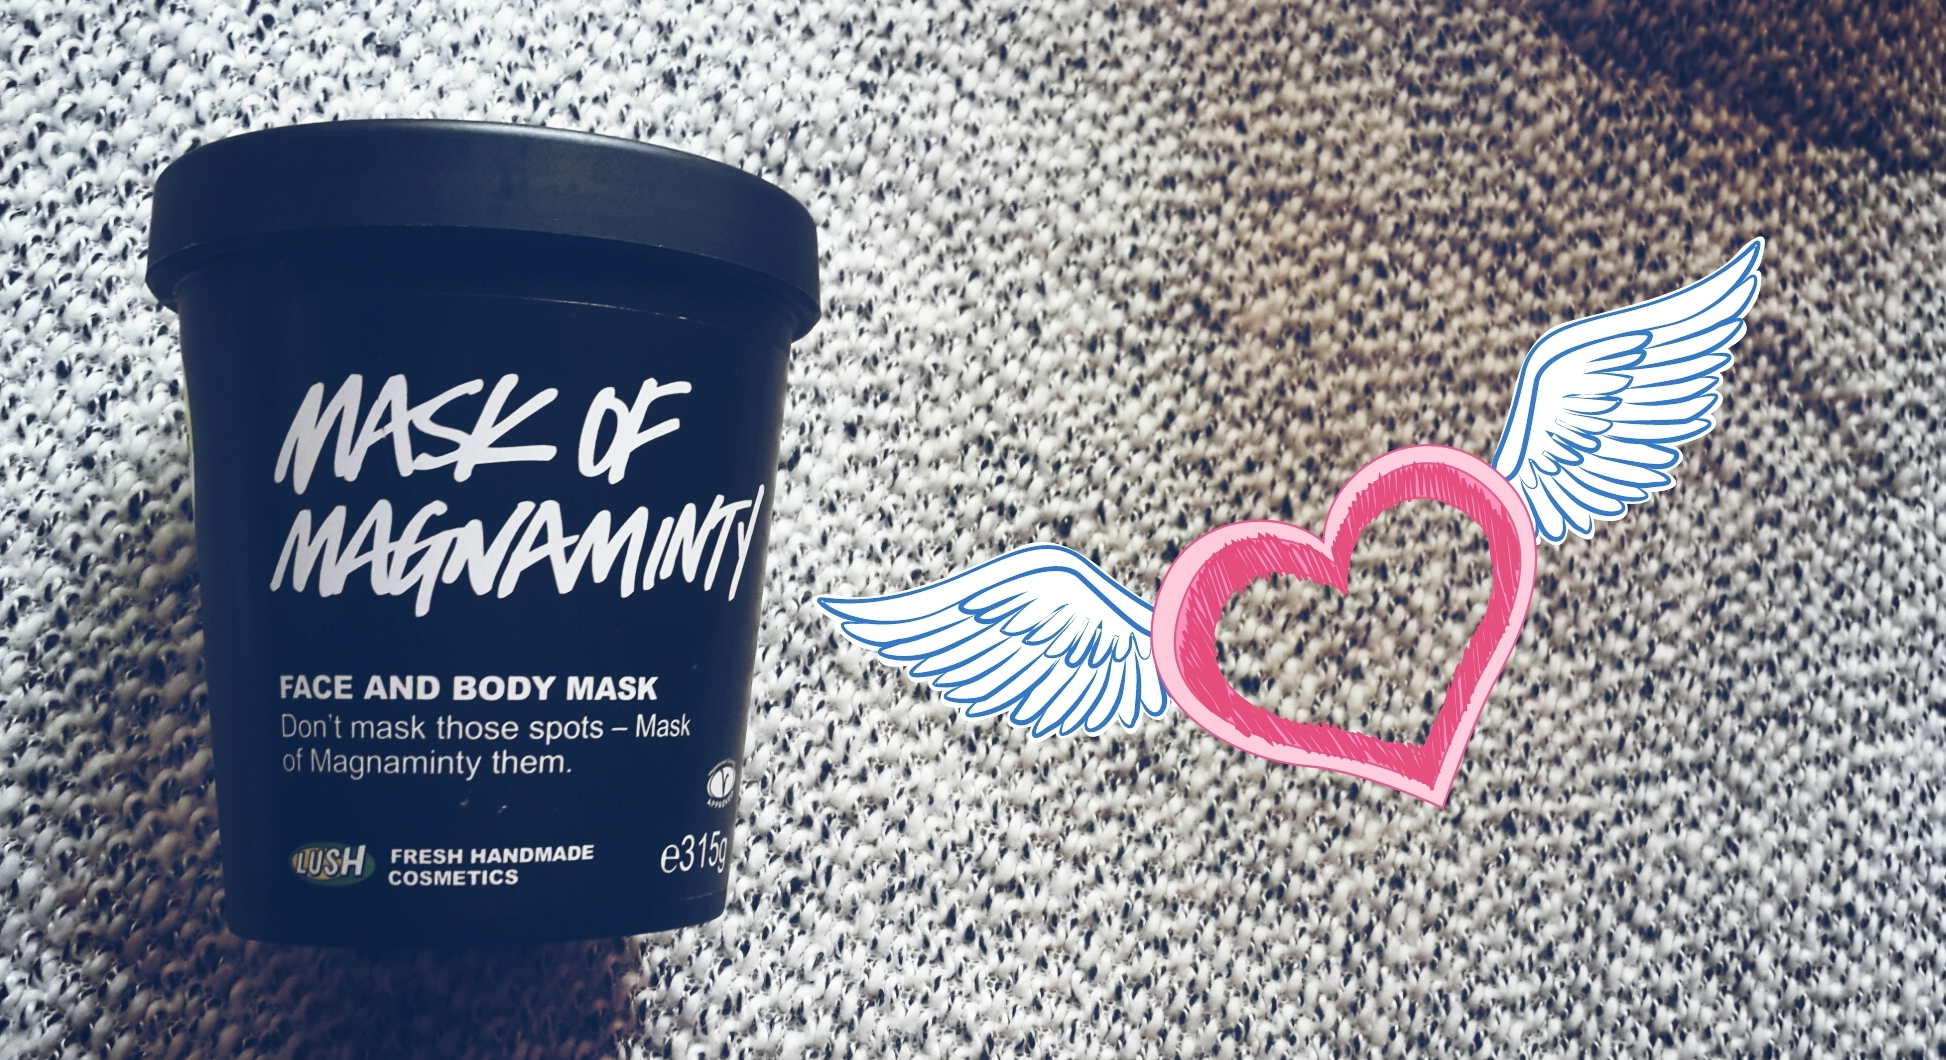 Mask of Magnaminty by LUSH Review